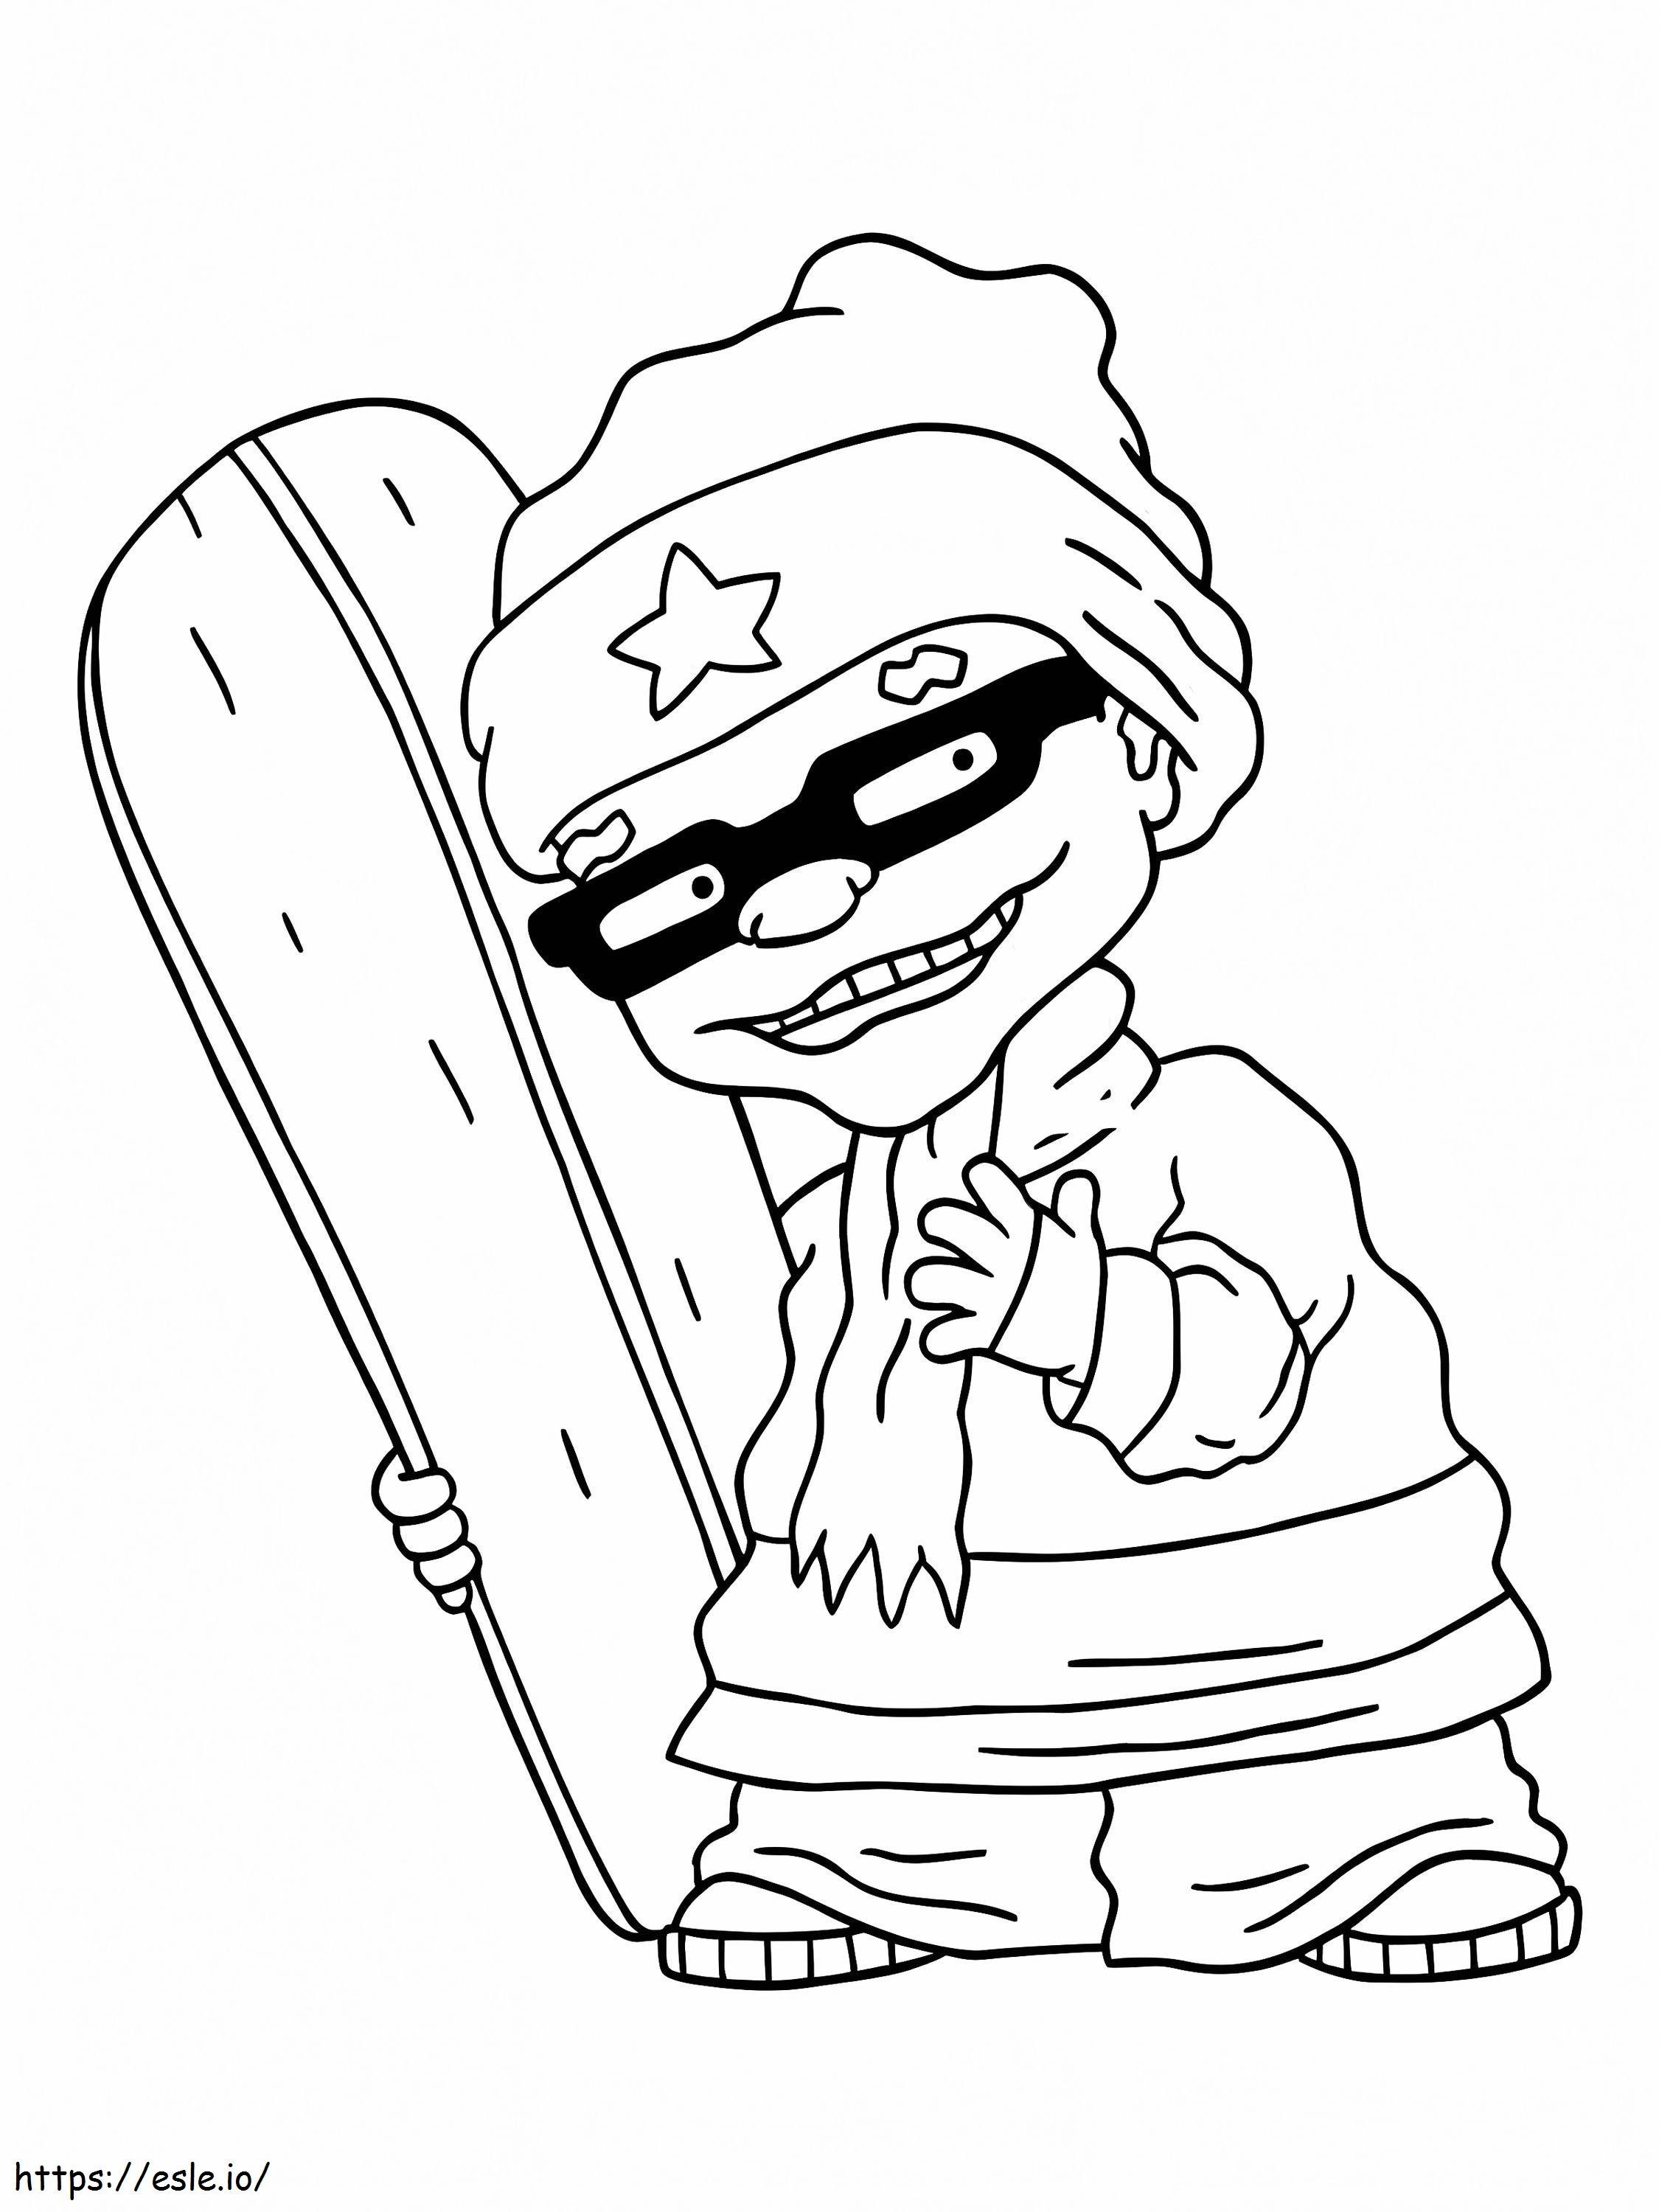 Rocket Power 11 coloring page